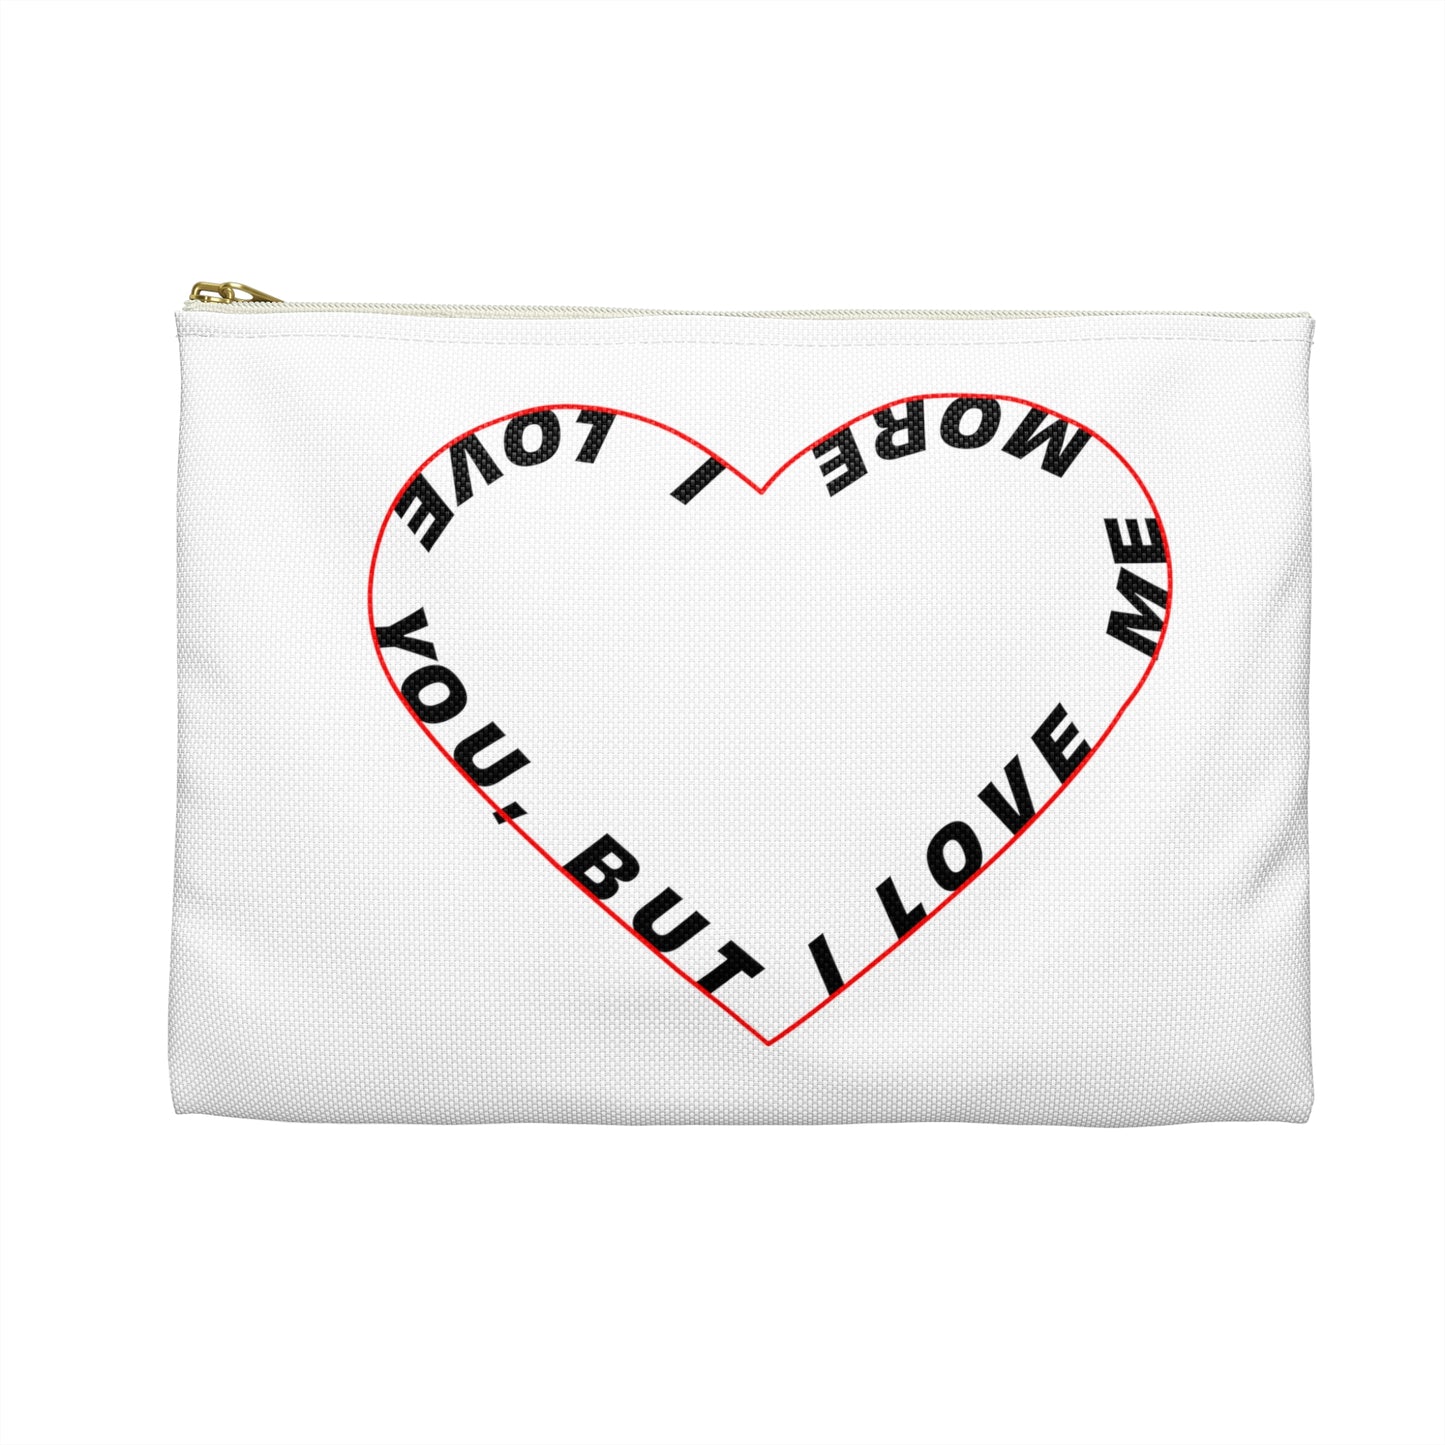 I Love You But I Love Me More Pouch